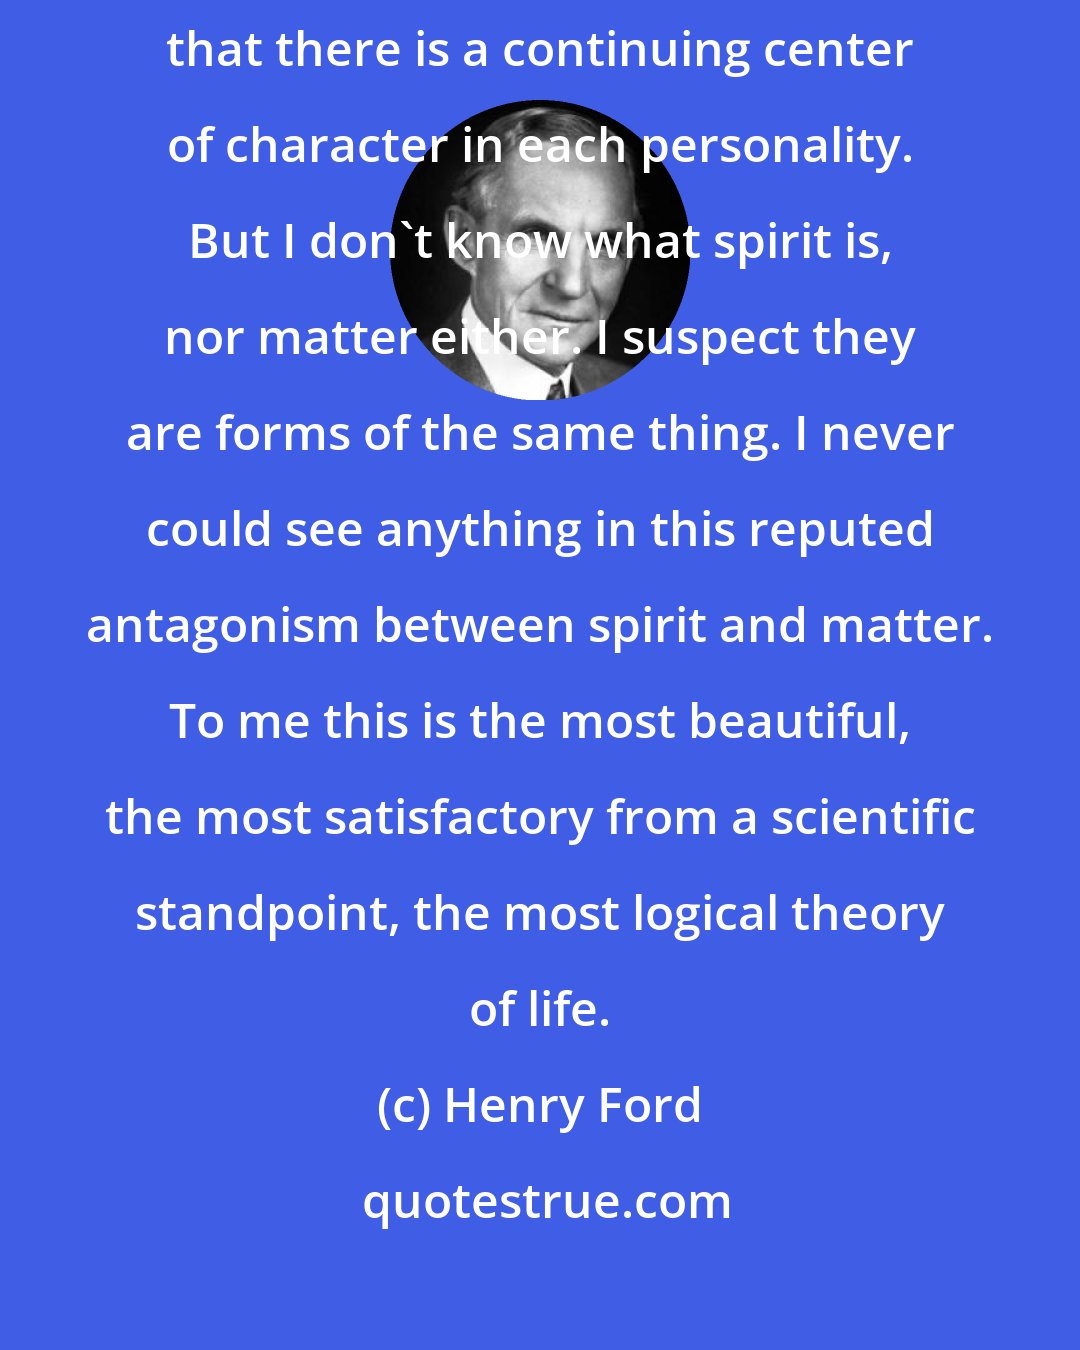 Henry Ford: I am in exact accord with the belief of Thomas Edison that spirit is immortal, that there is a continuing center of character in each personality. But I don't know what spirit is, nor matter either. I suspect they are forms of the same thing. I never could see anything in this reputed antagonism between spirit and matter. To me this is the most beautiful, the most satisfactory from a scientific standpoint, the most logical theory of life.